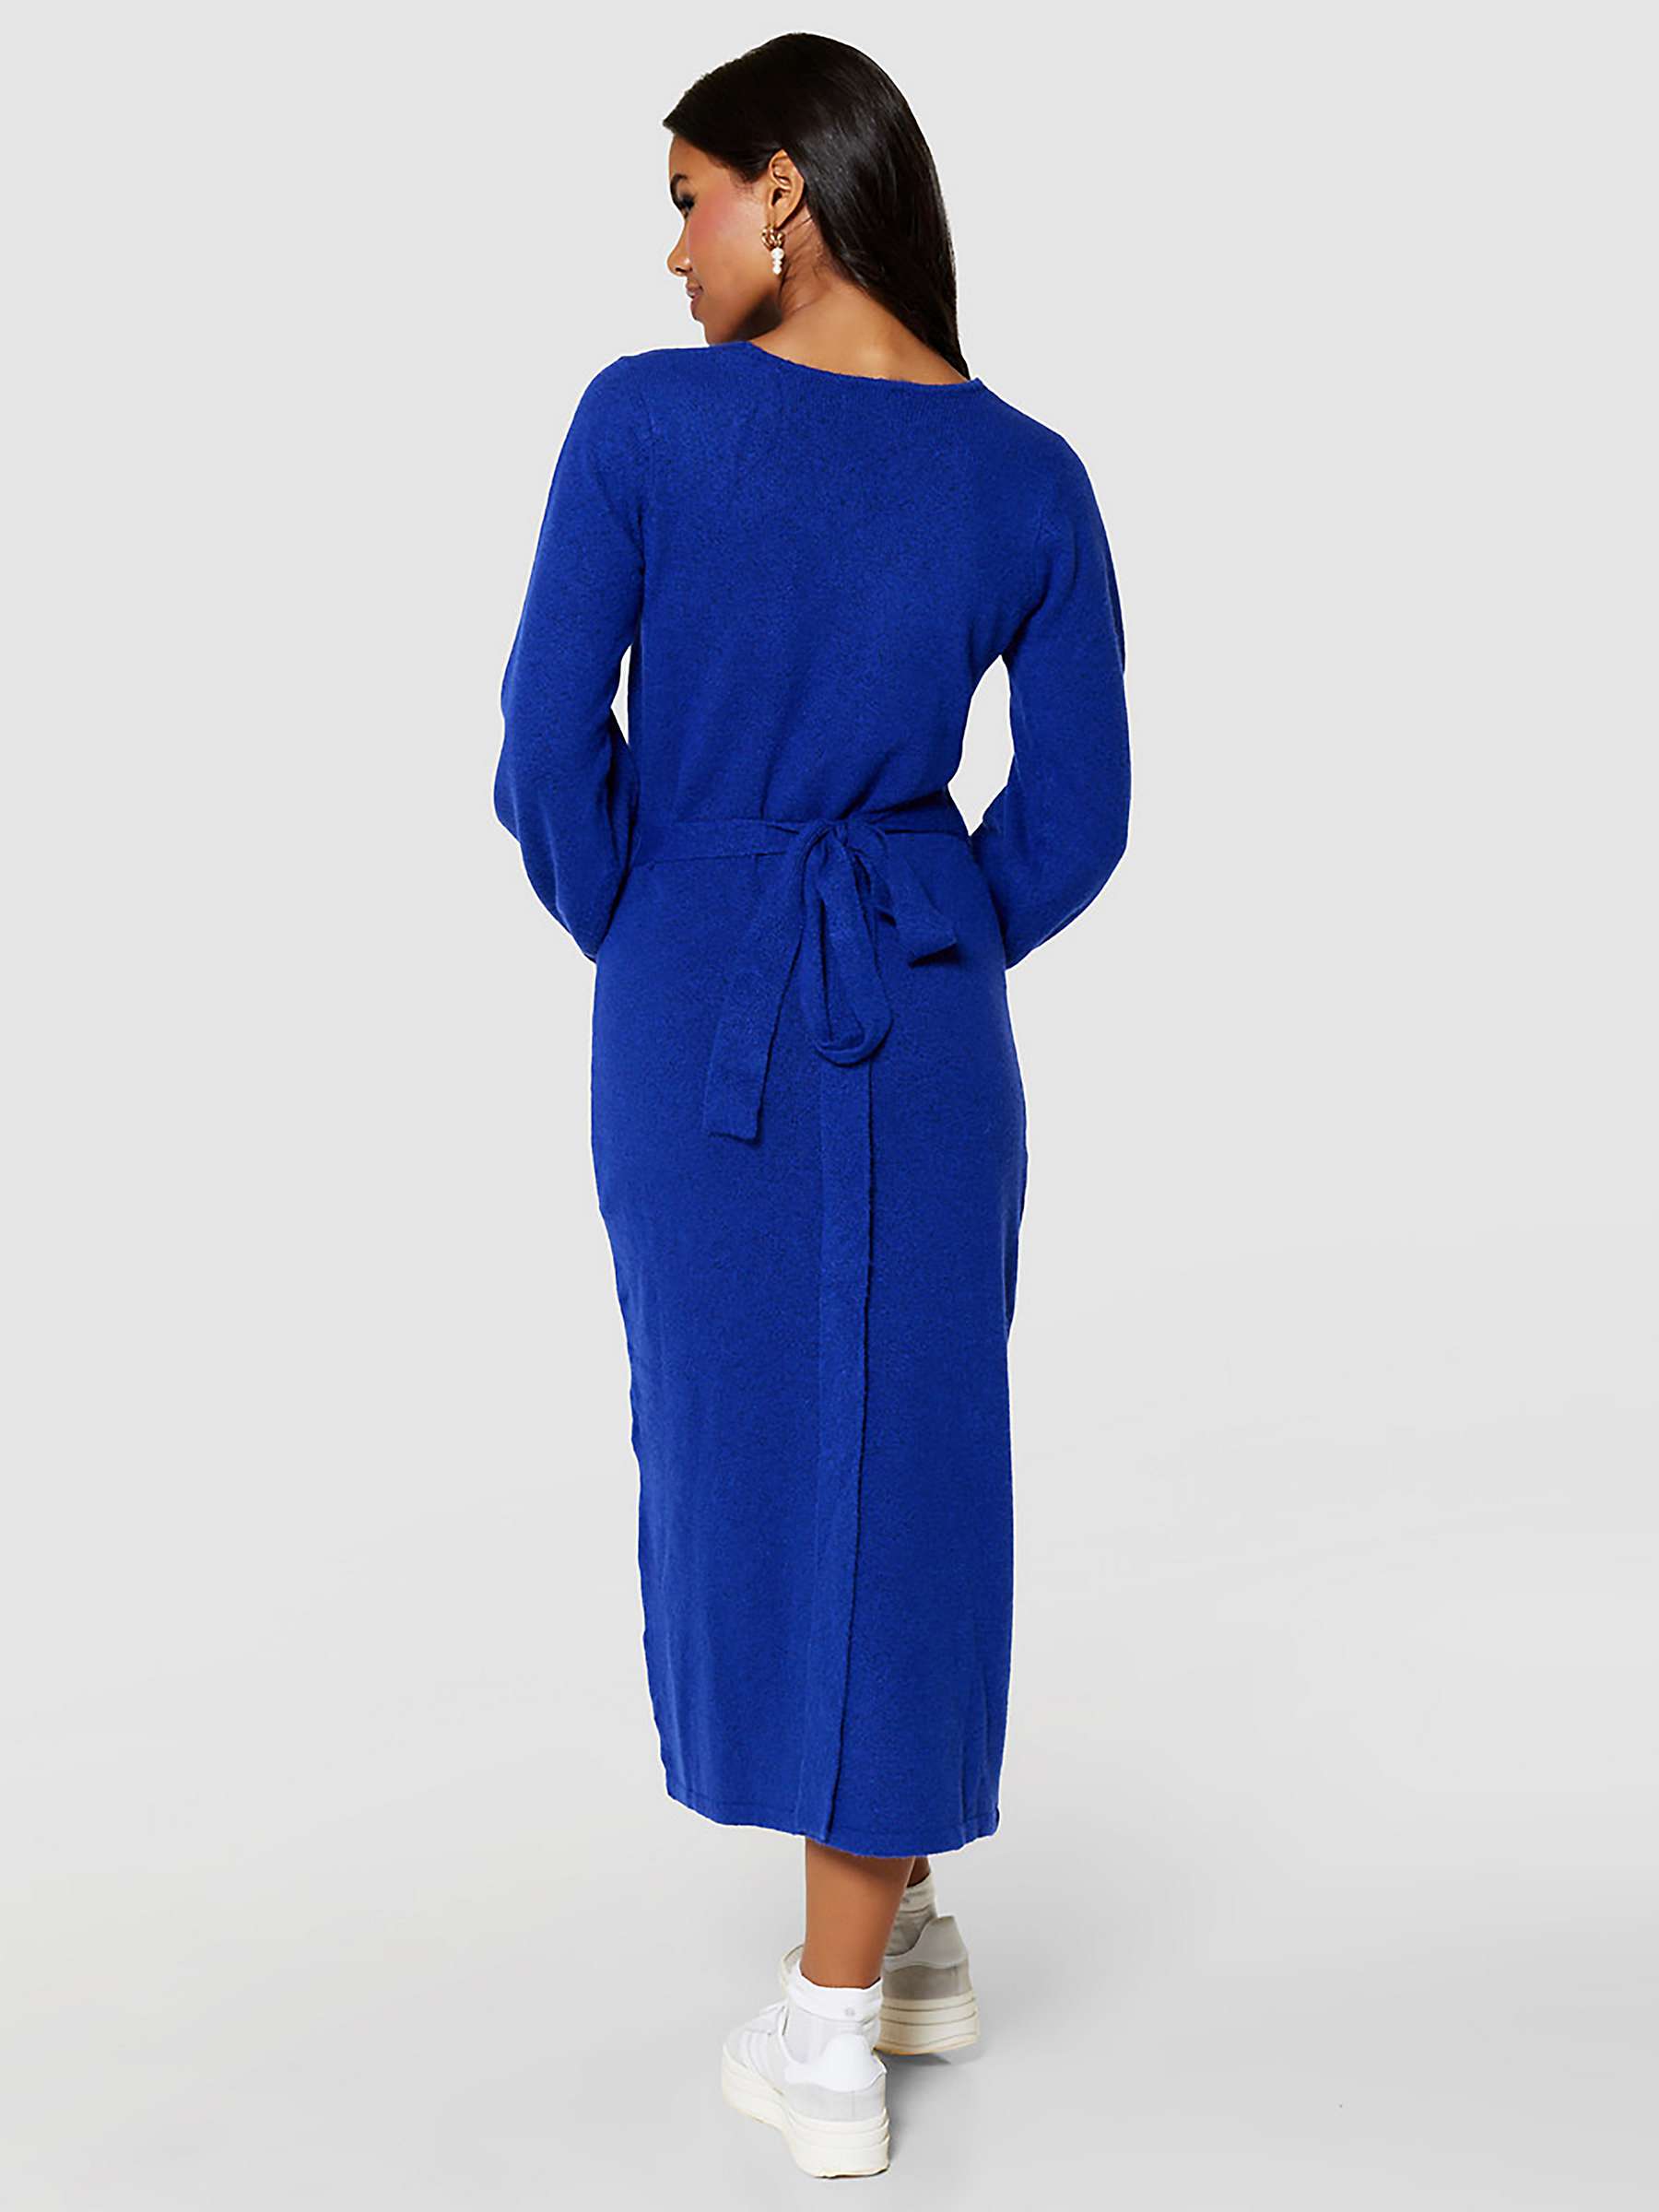 Buy Closet London Knitted Wrap Dress Online at johnlewis.com